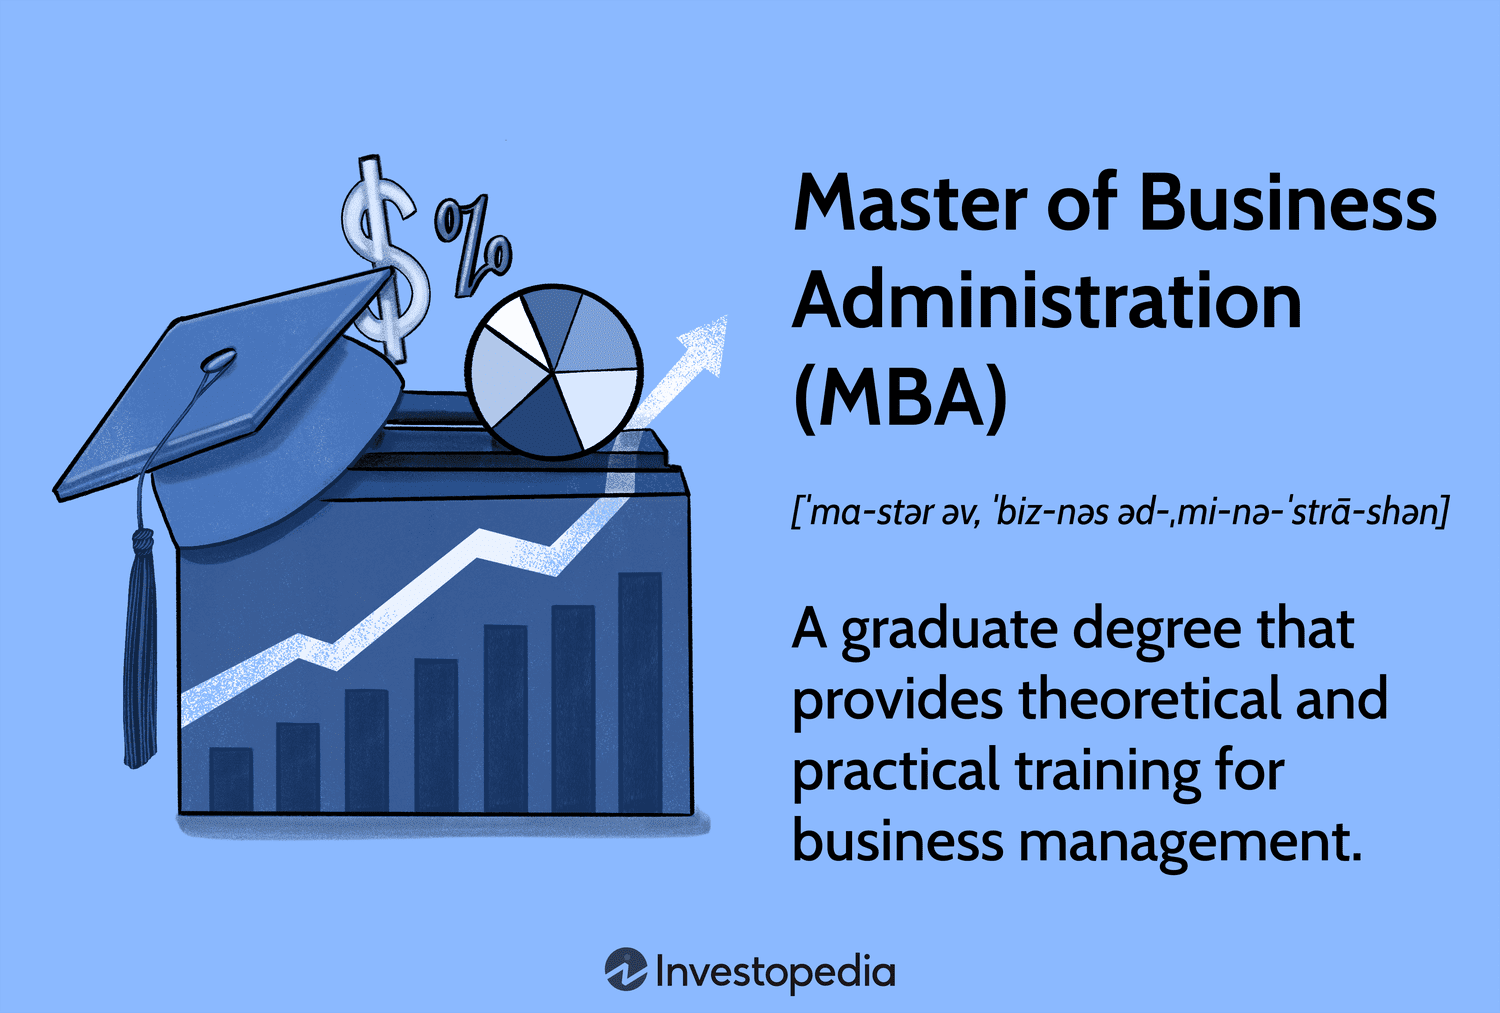 What Is a Master of Business Administration (MBA)? [Video]